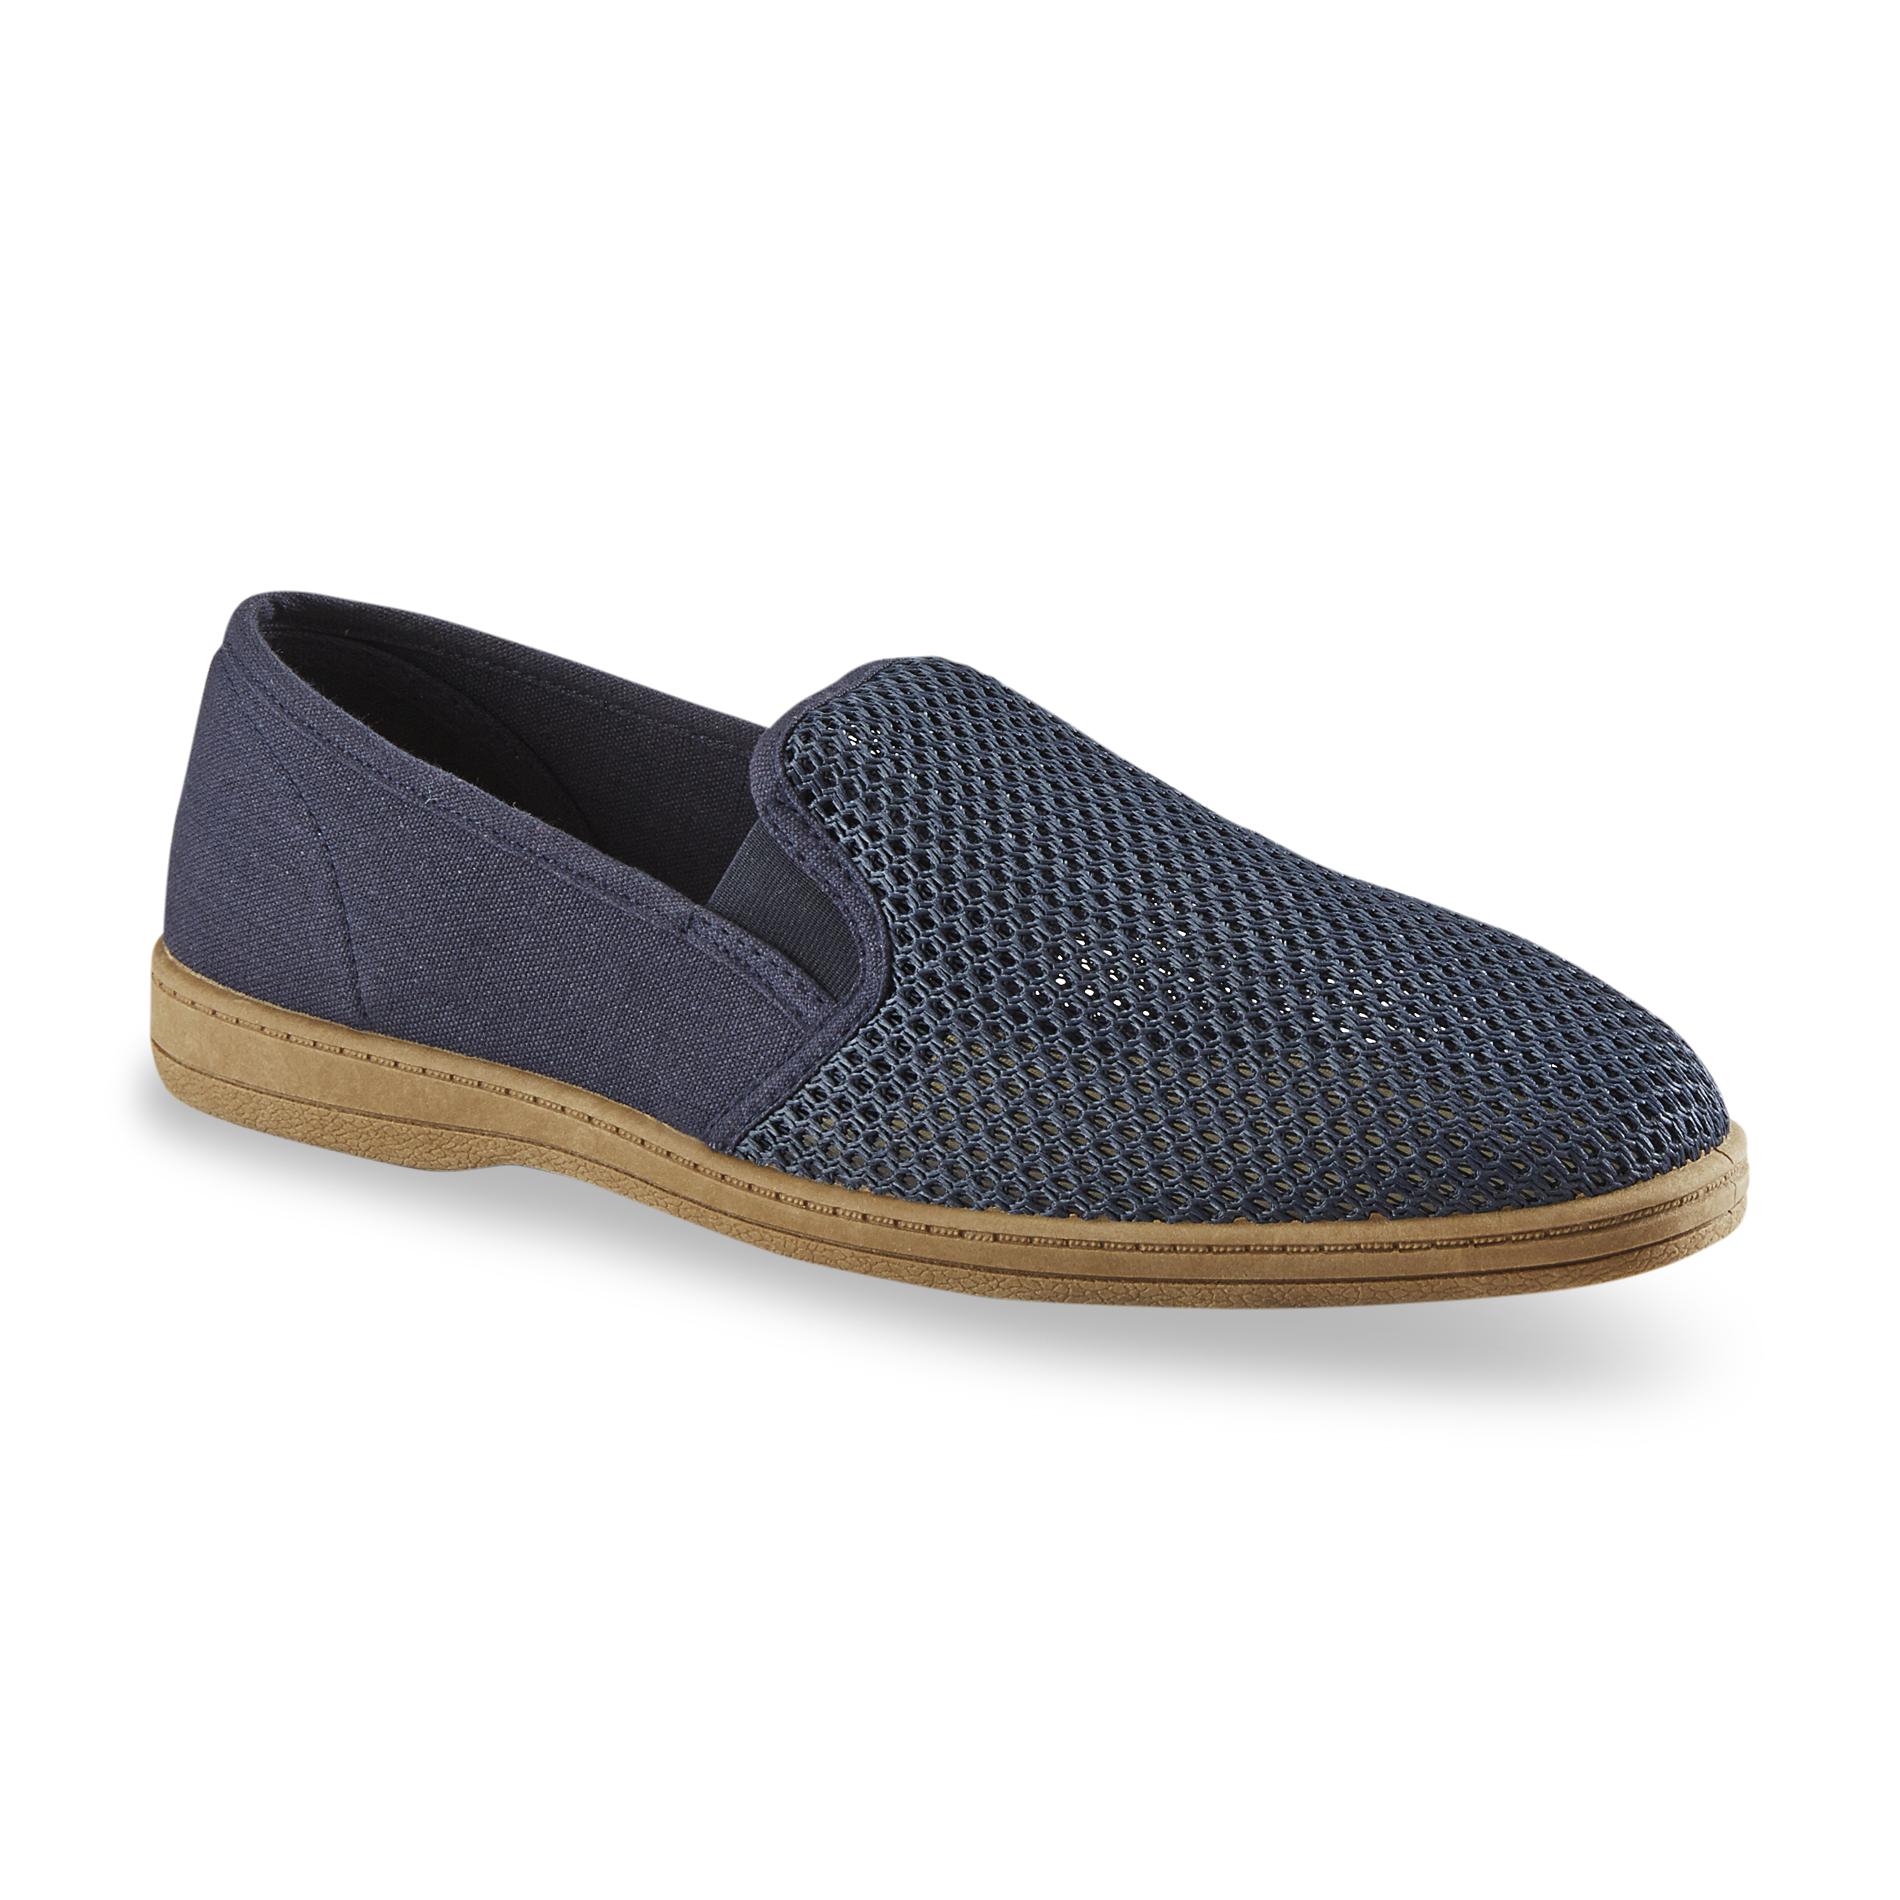 Basic Editions Men's Casual Canvas Mesh 3 - Navy